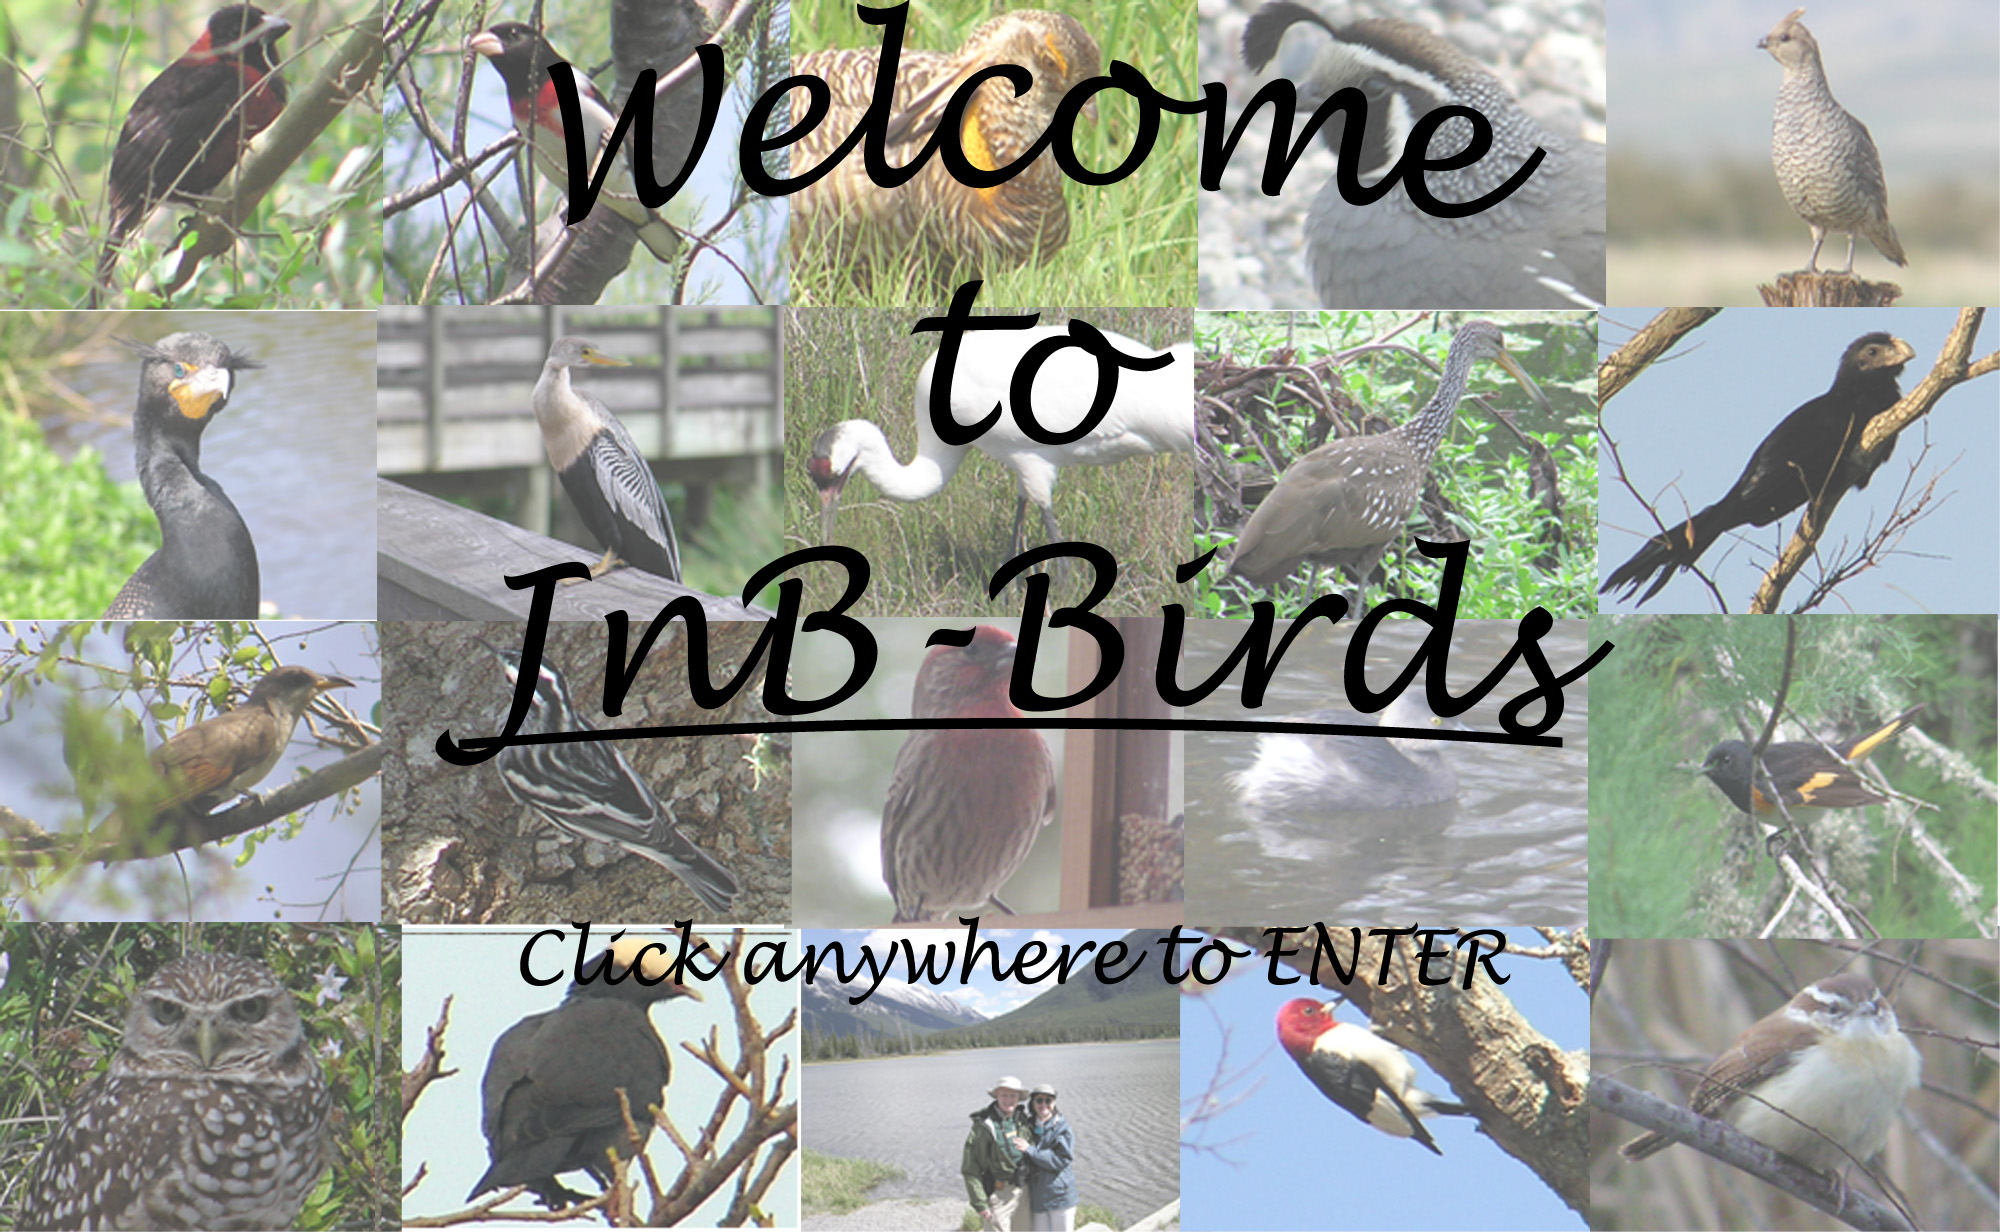 Click anywhere in the picture to ENTER Jnb-Birds.